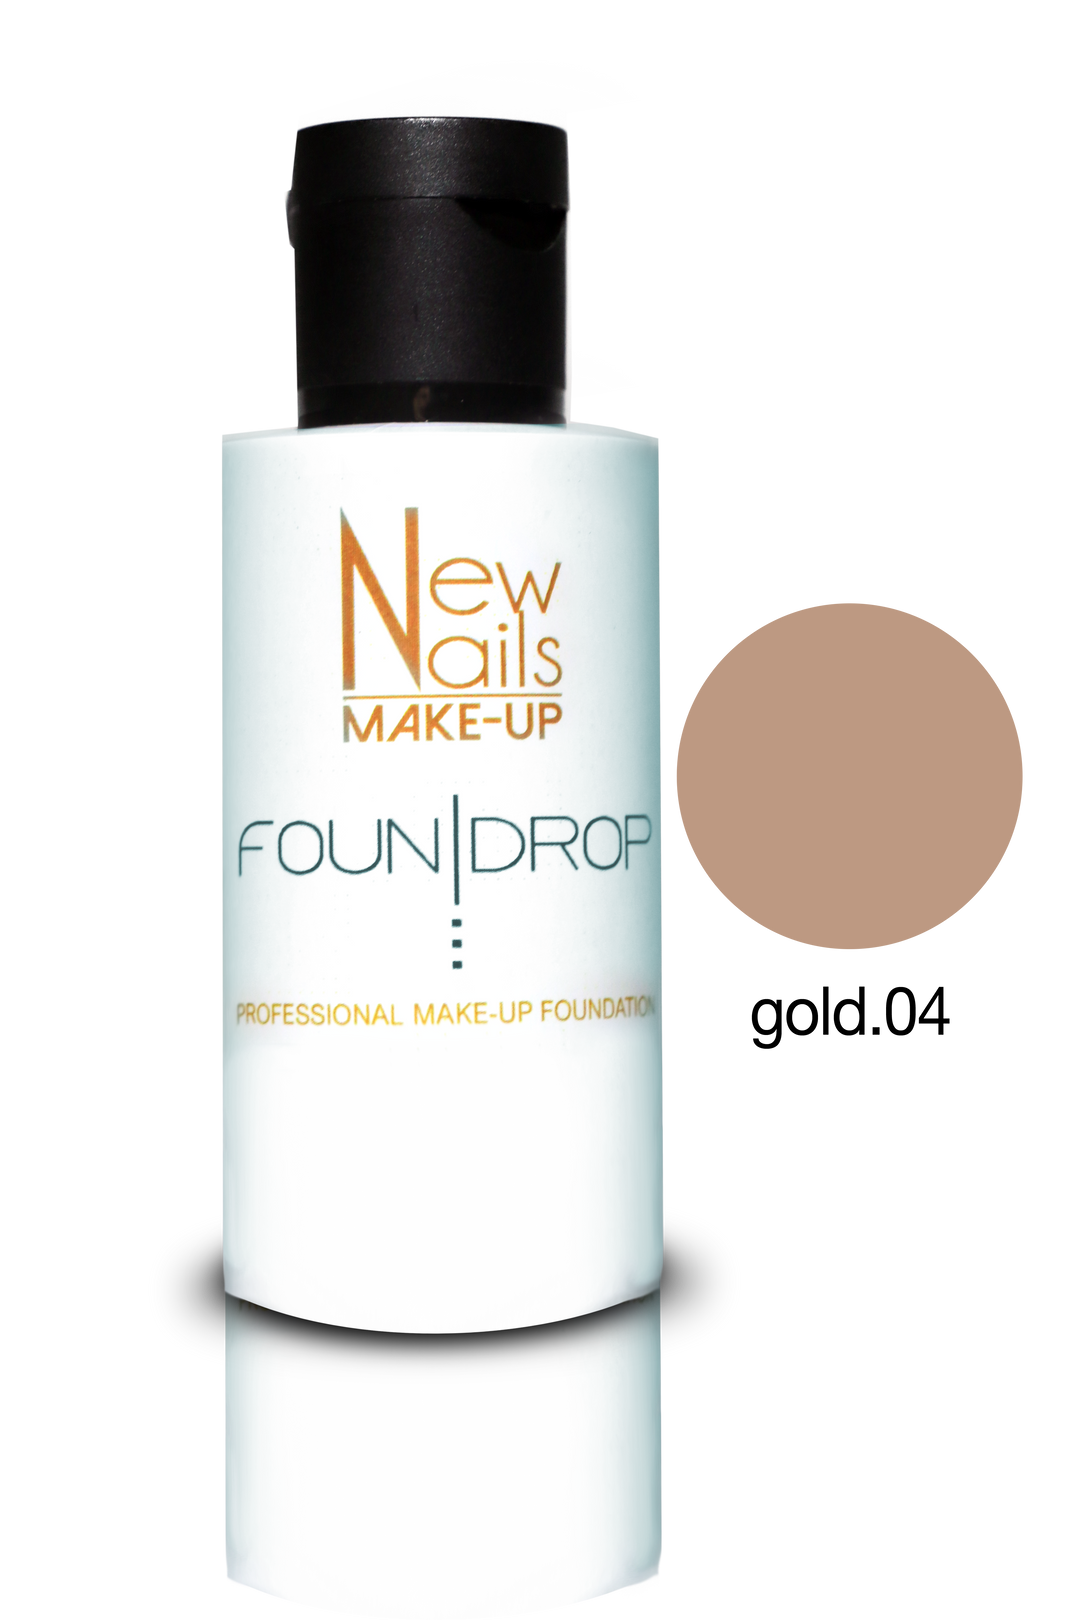 FOUNDROP high coverage liquid foundation